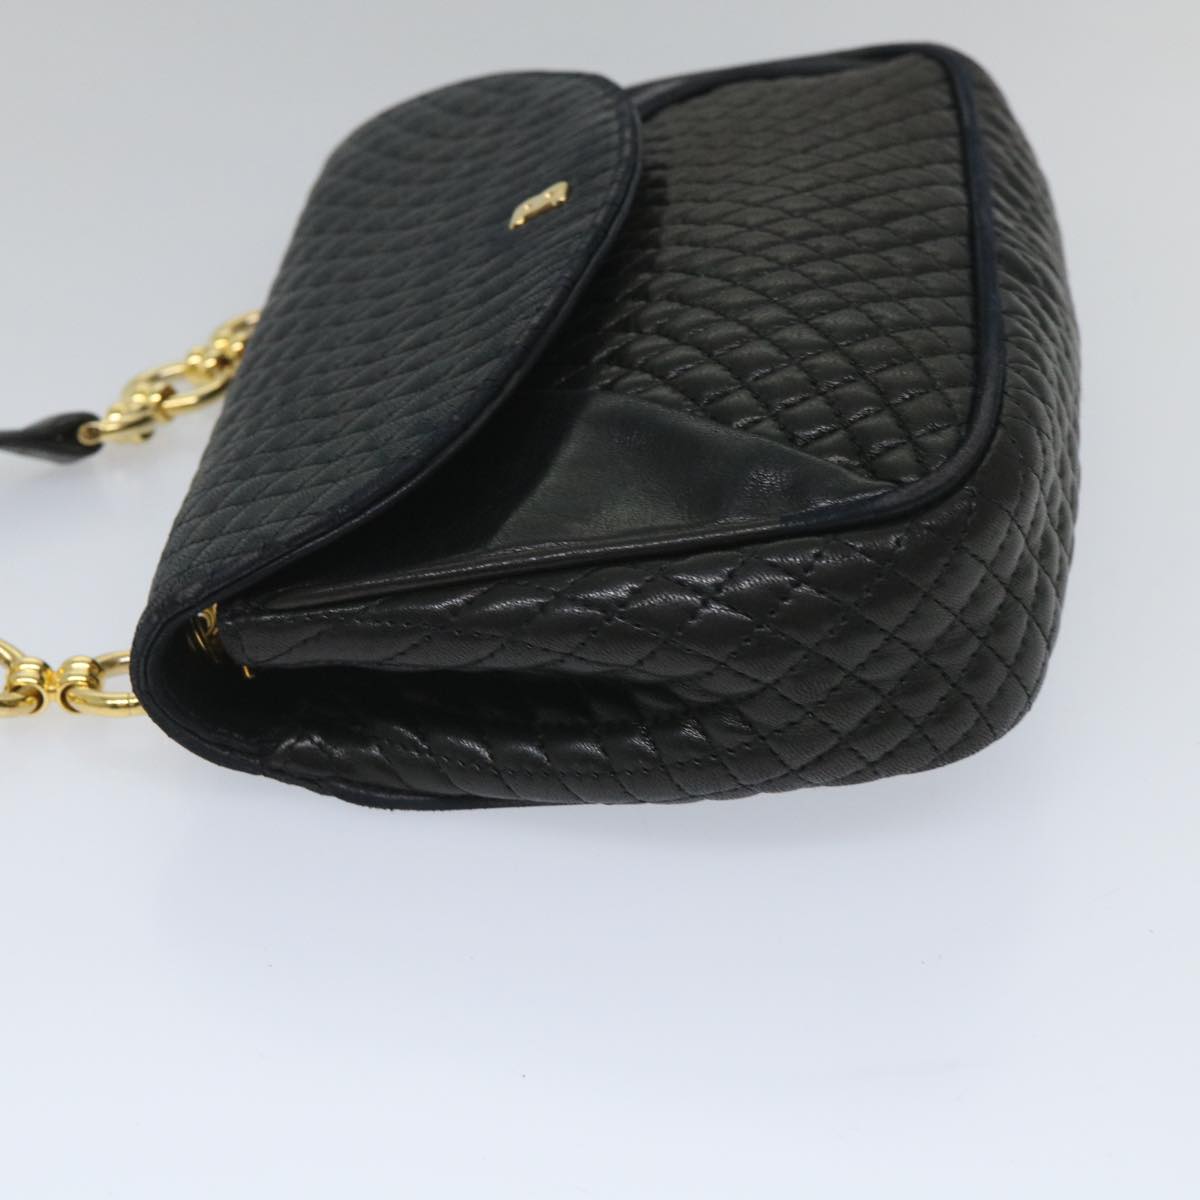 BALLY Quilted Shoulder Bag Leather Black Auth bs9082